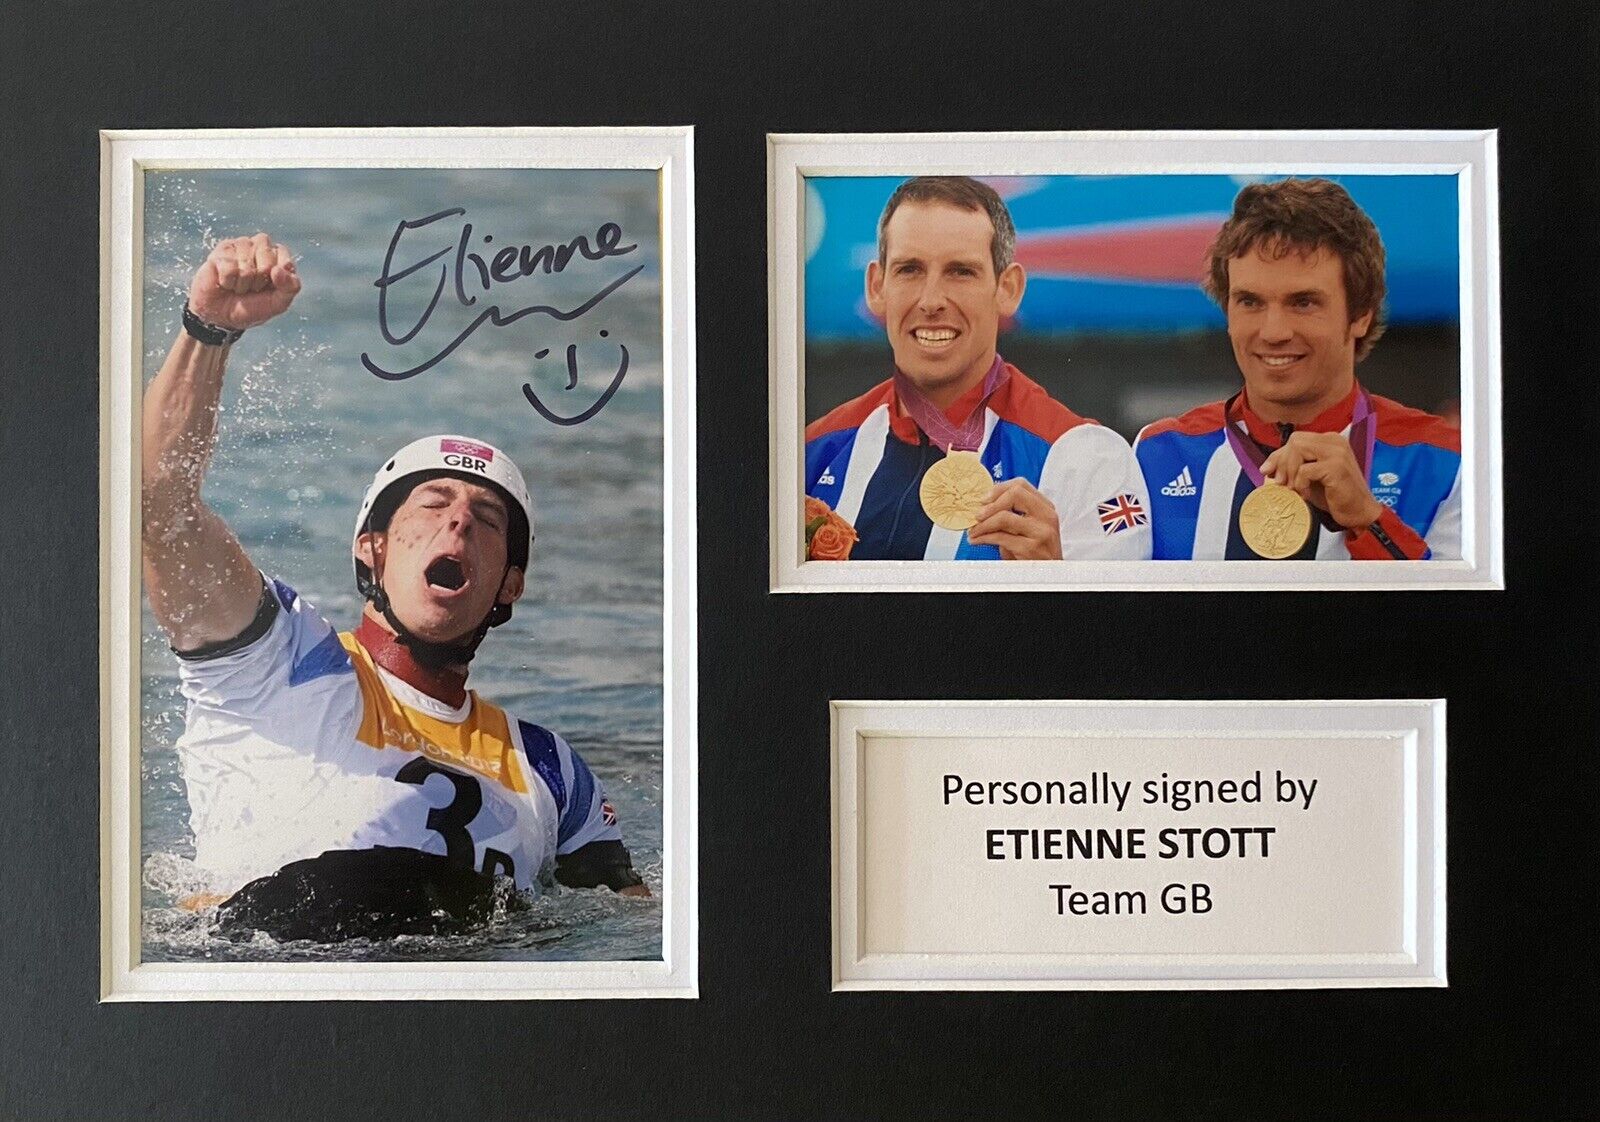 Etienne Stott Hand Signed Photo Poster painting In A4 Mount Display - Olympics - Team GB 2